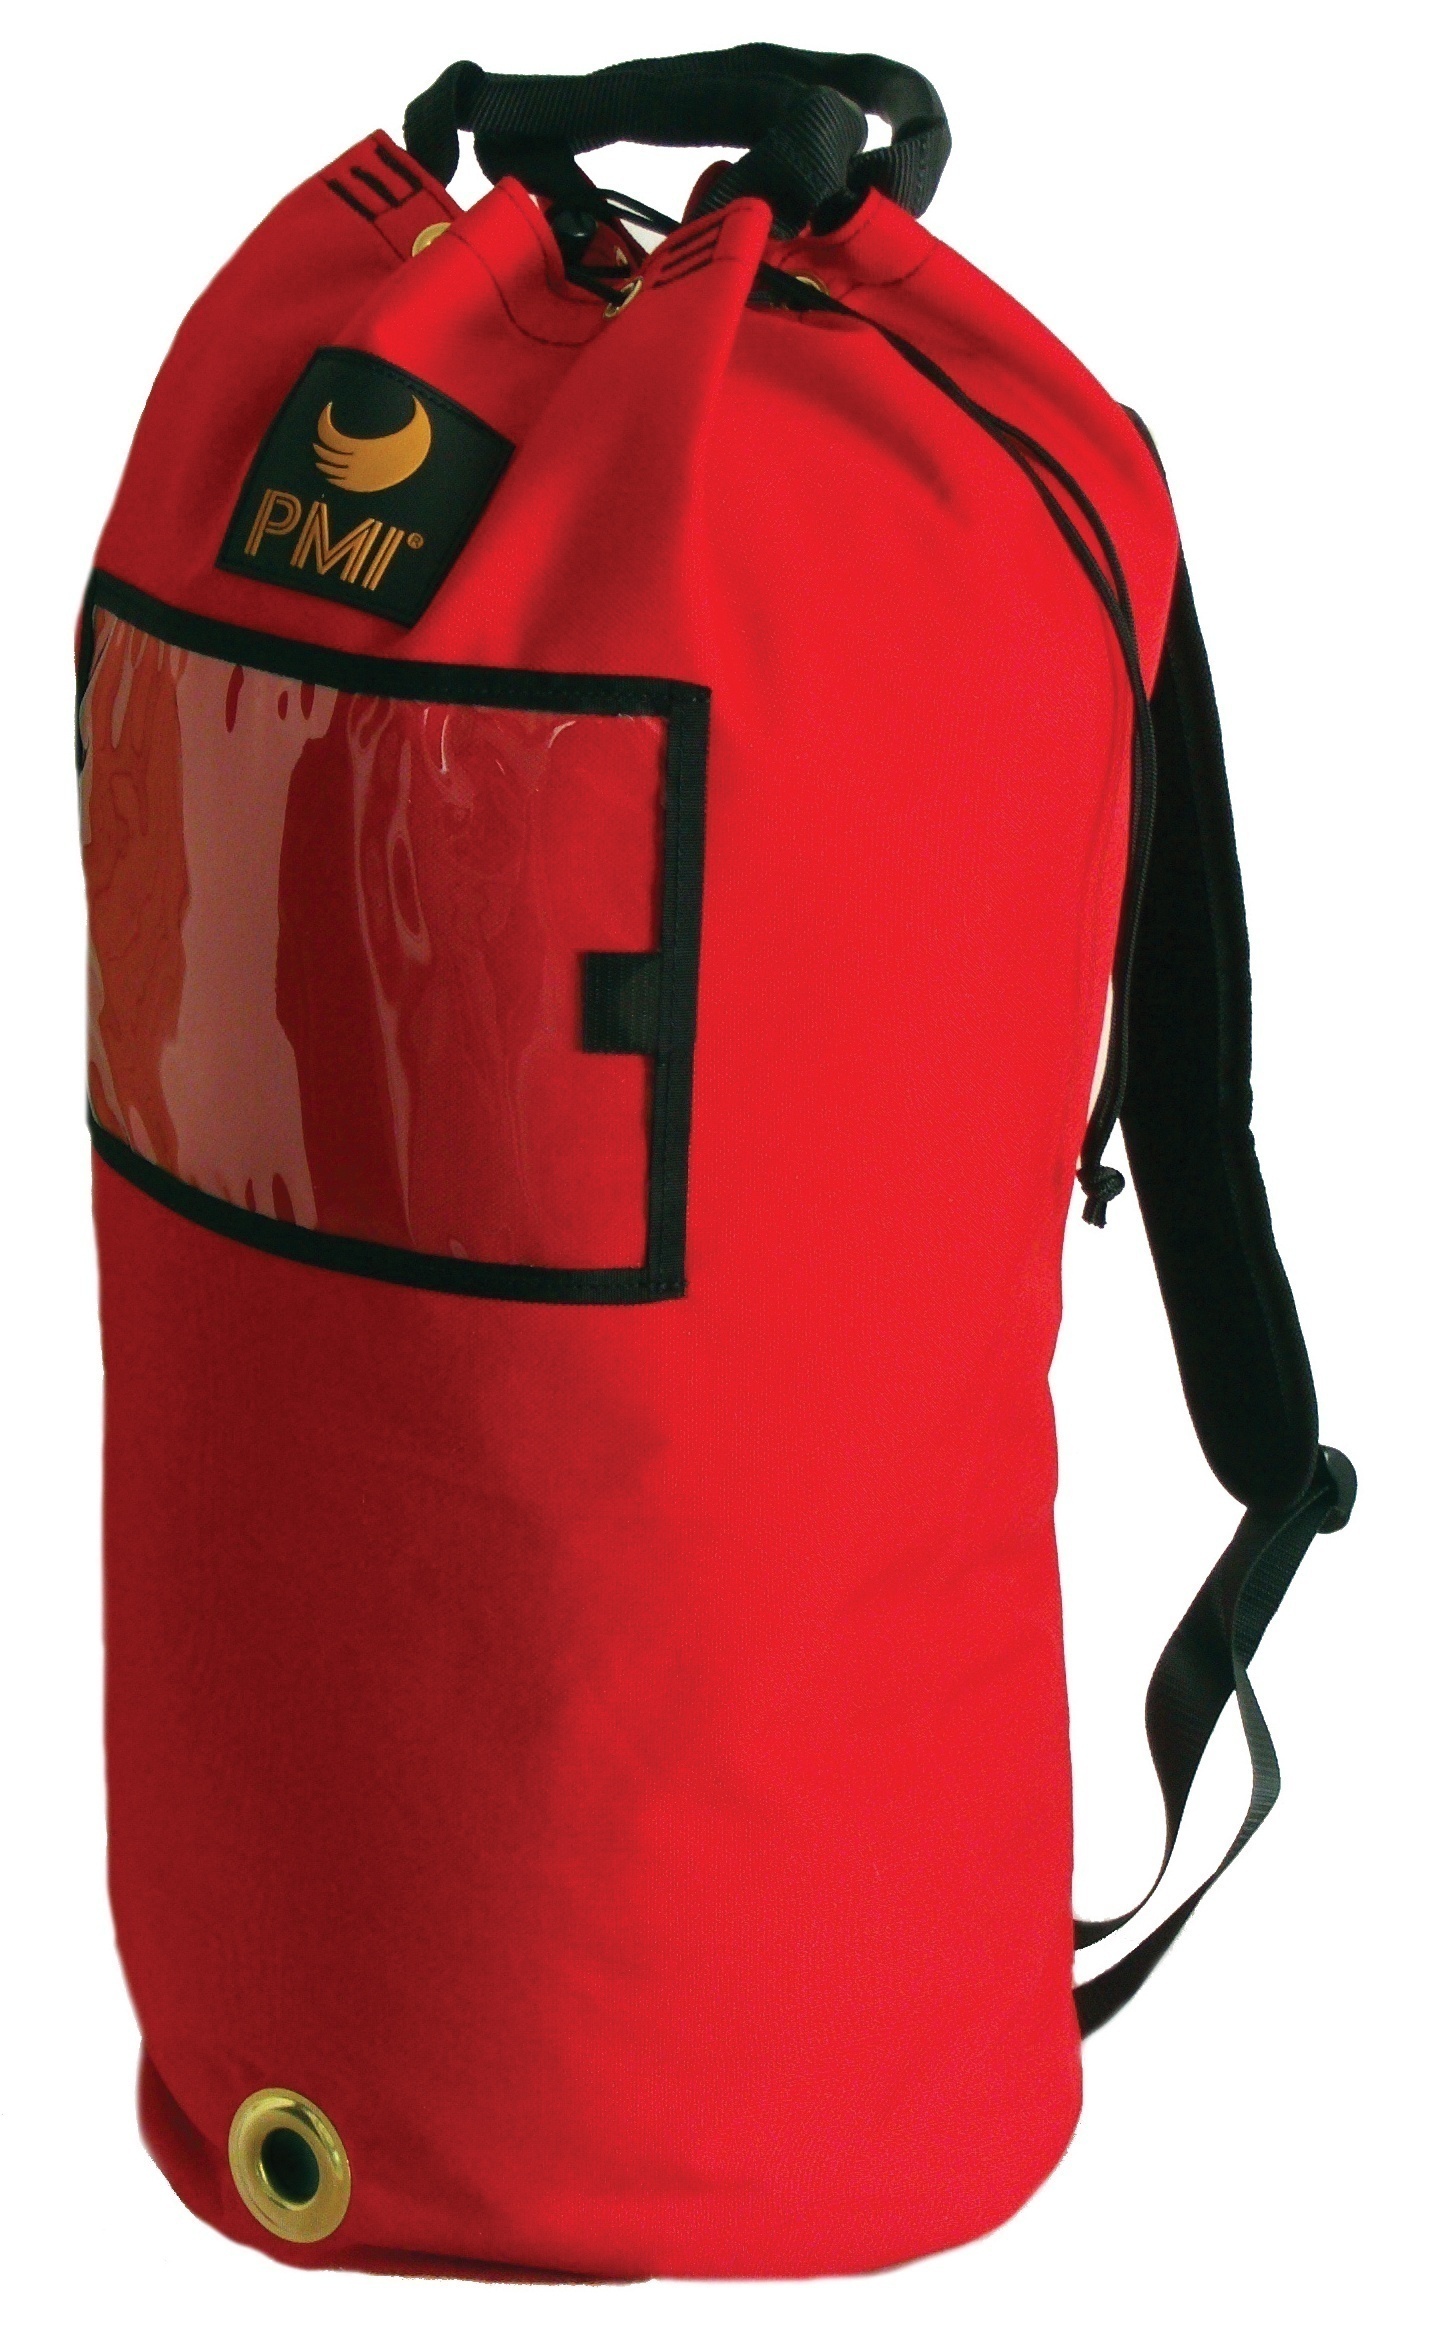 PMI Large Rope Pack from Columbia Safety